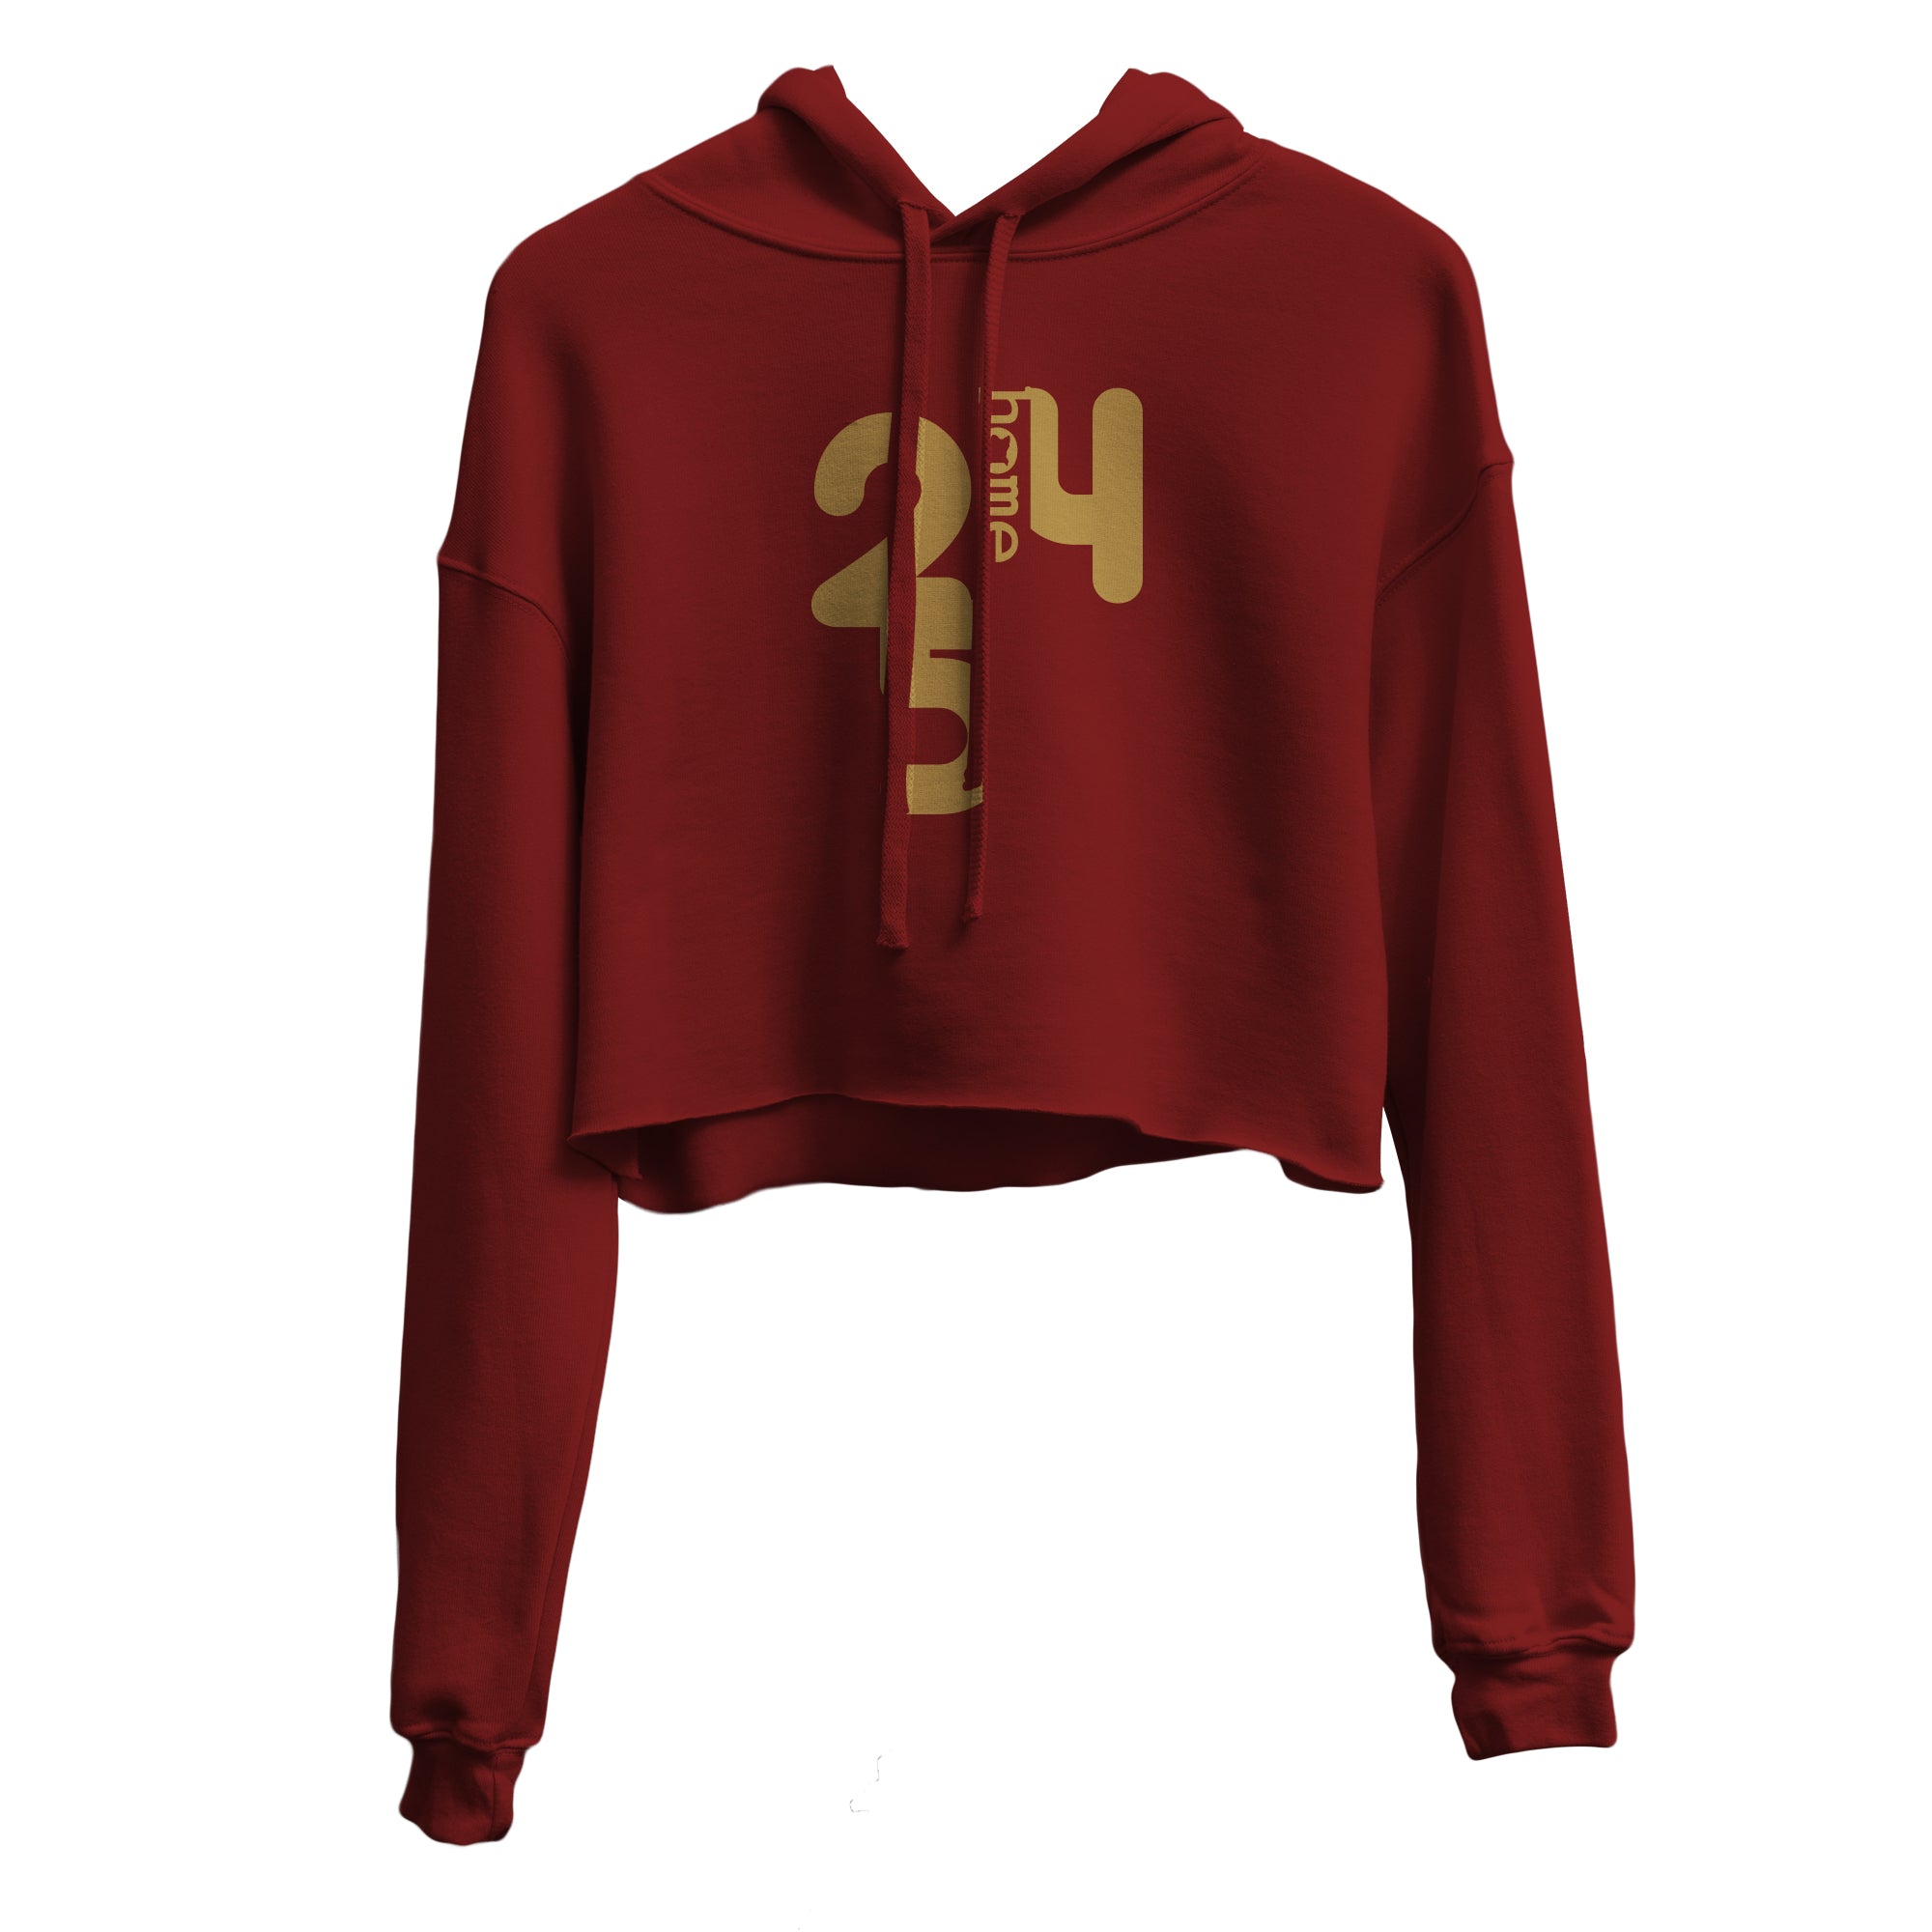 JBEEJURA DESINGZ | home_254 Burgundy Cropped Hoodie (heavy fabric) with a gold the 254 logo